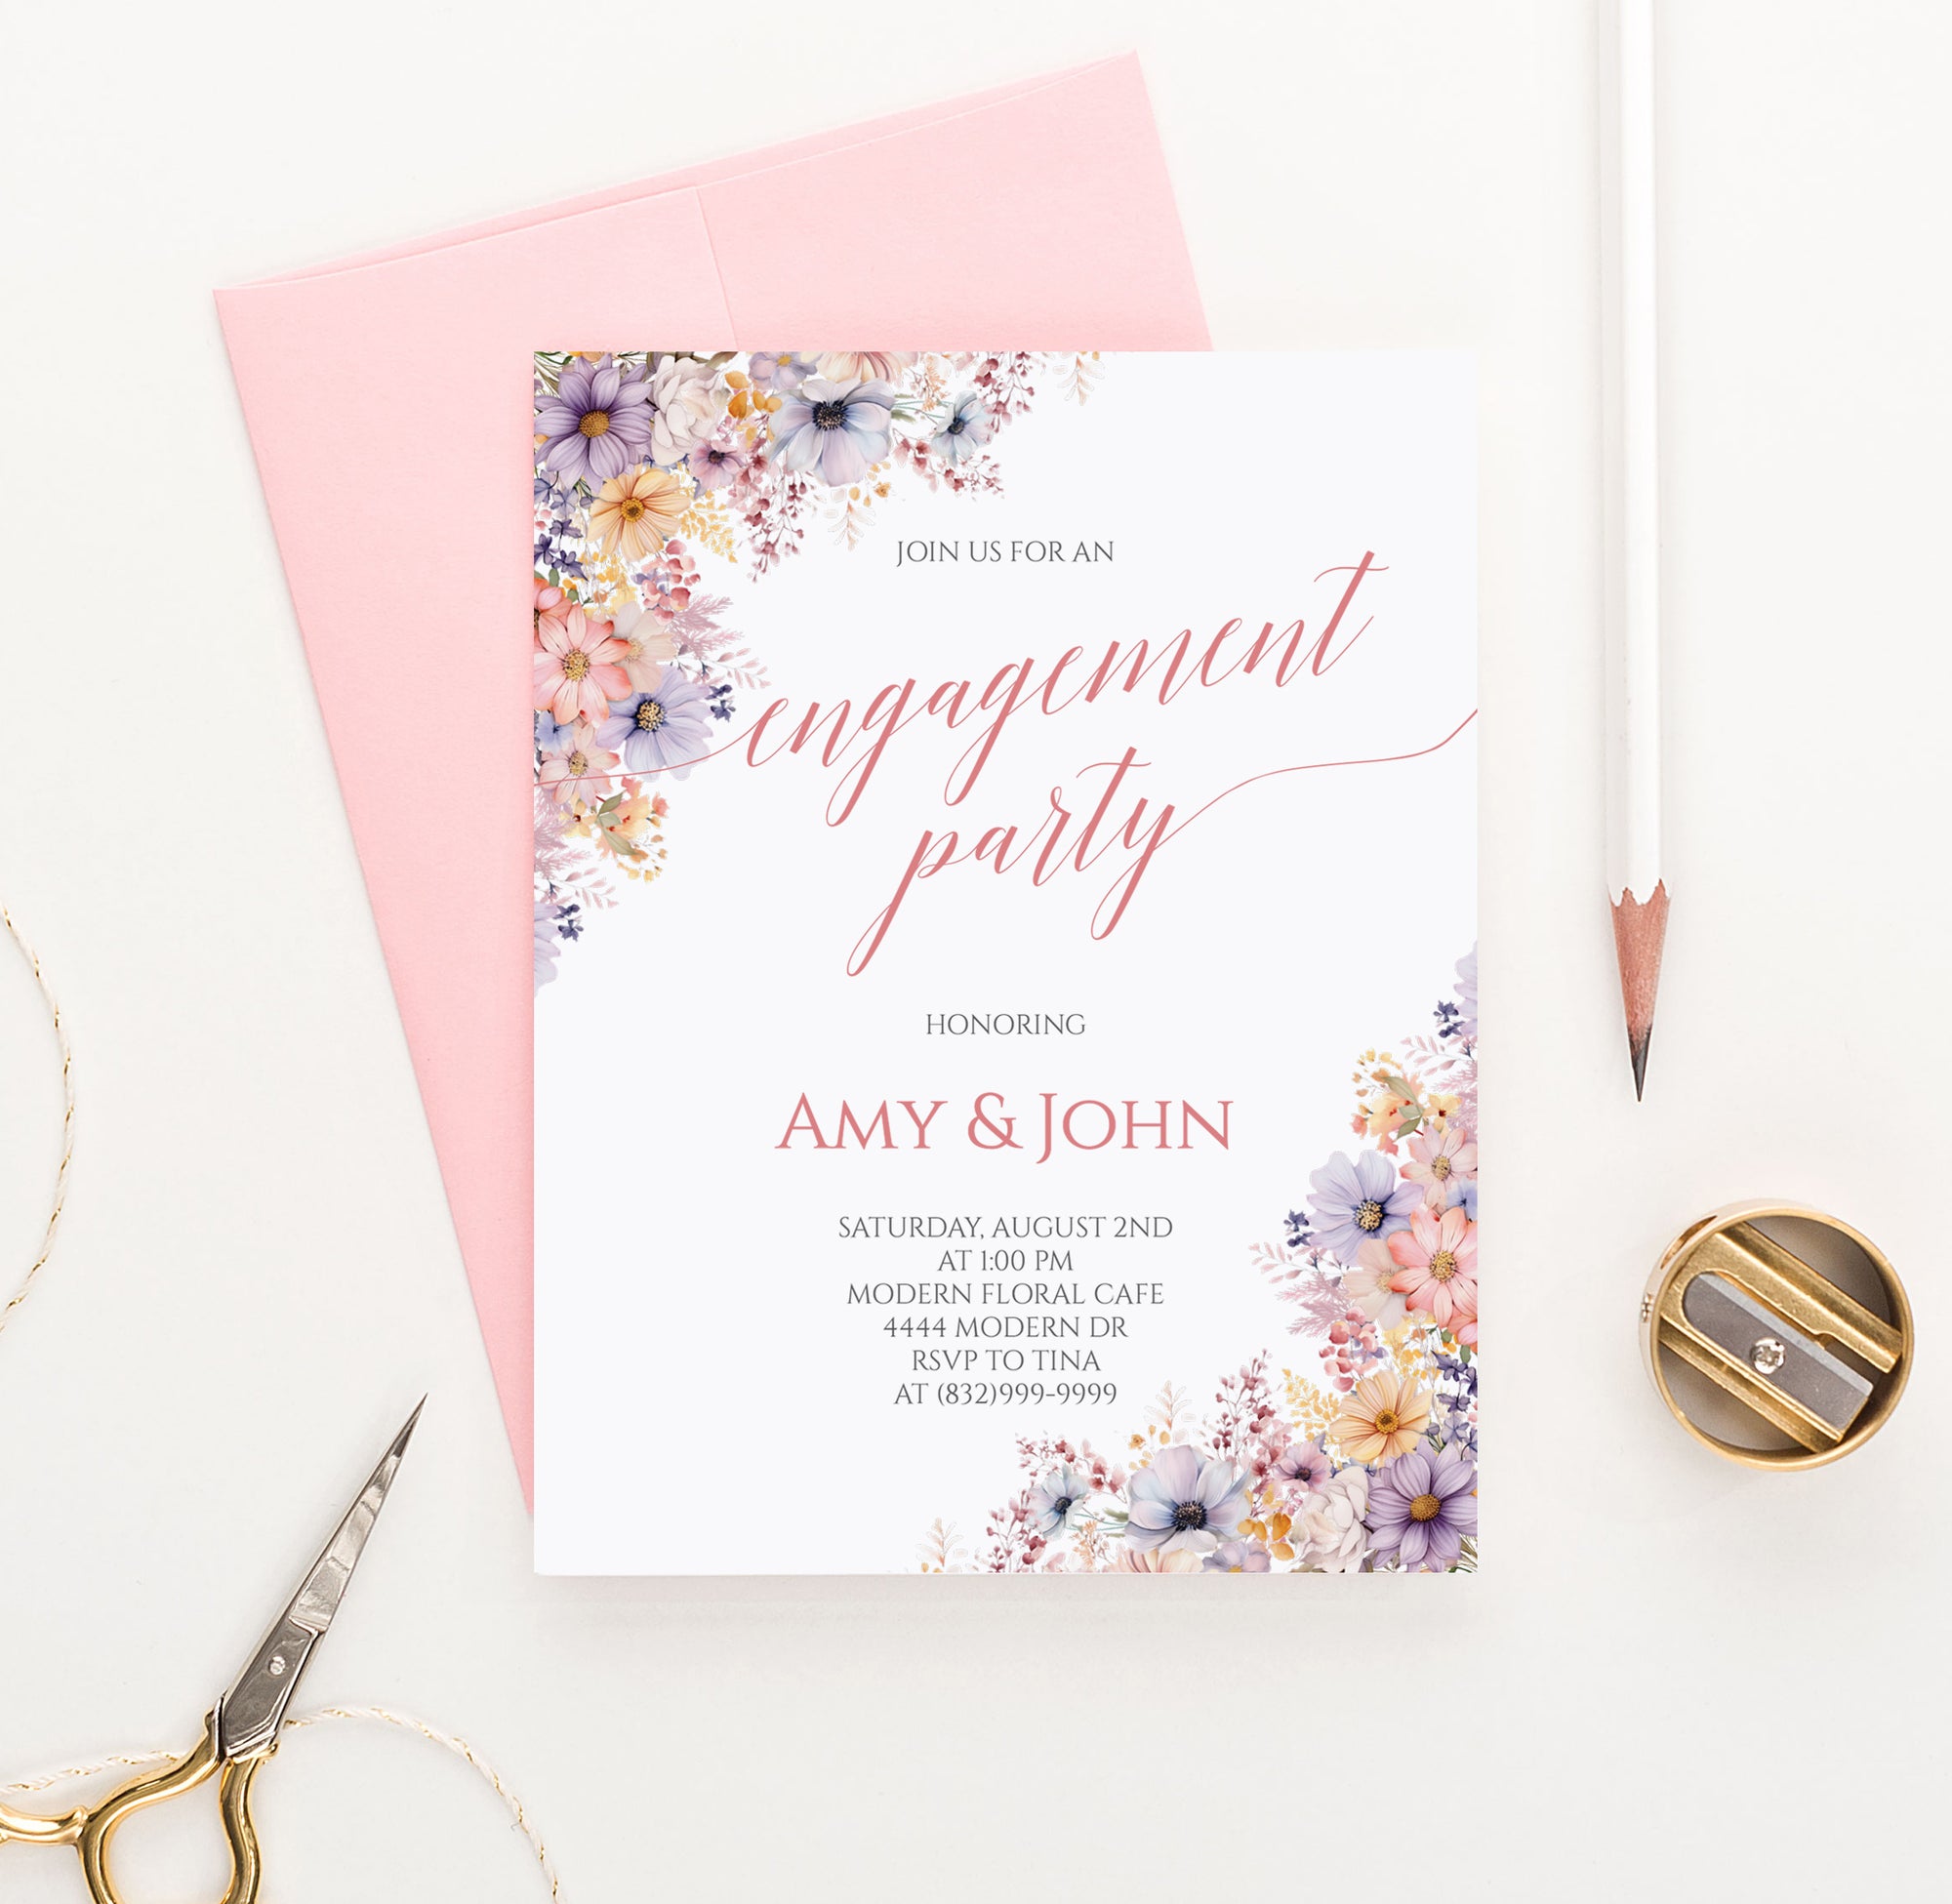 Classic Floral Wedding Engagement Party Invitations